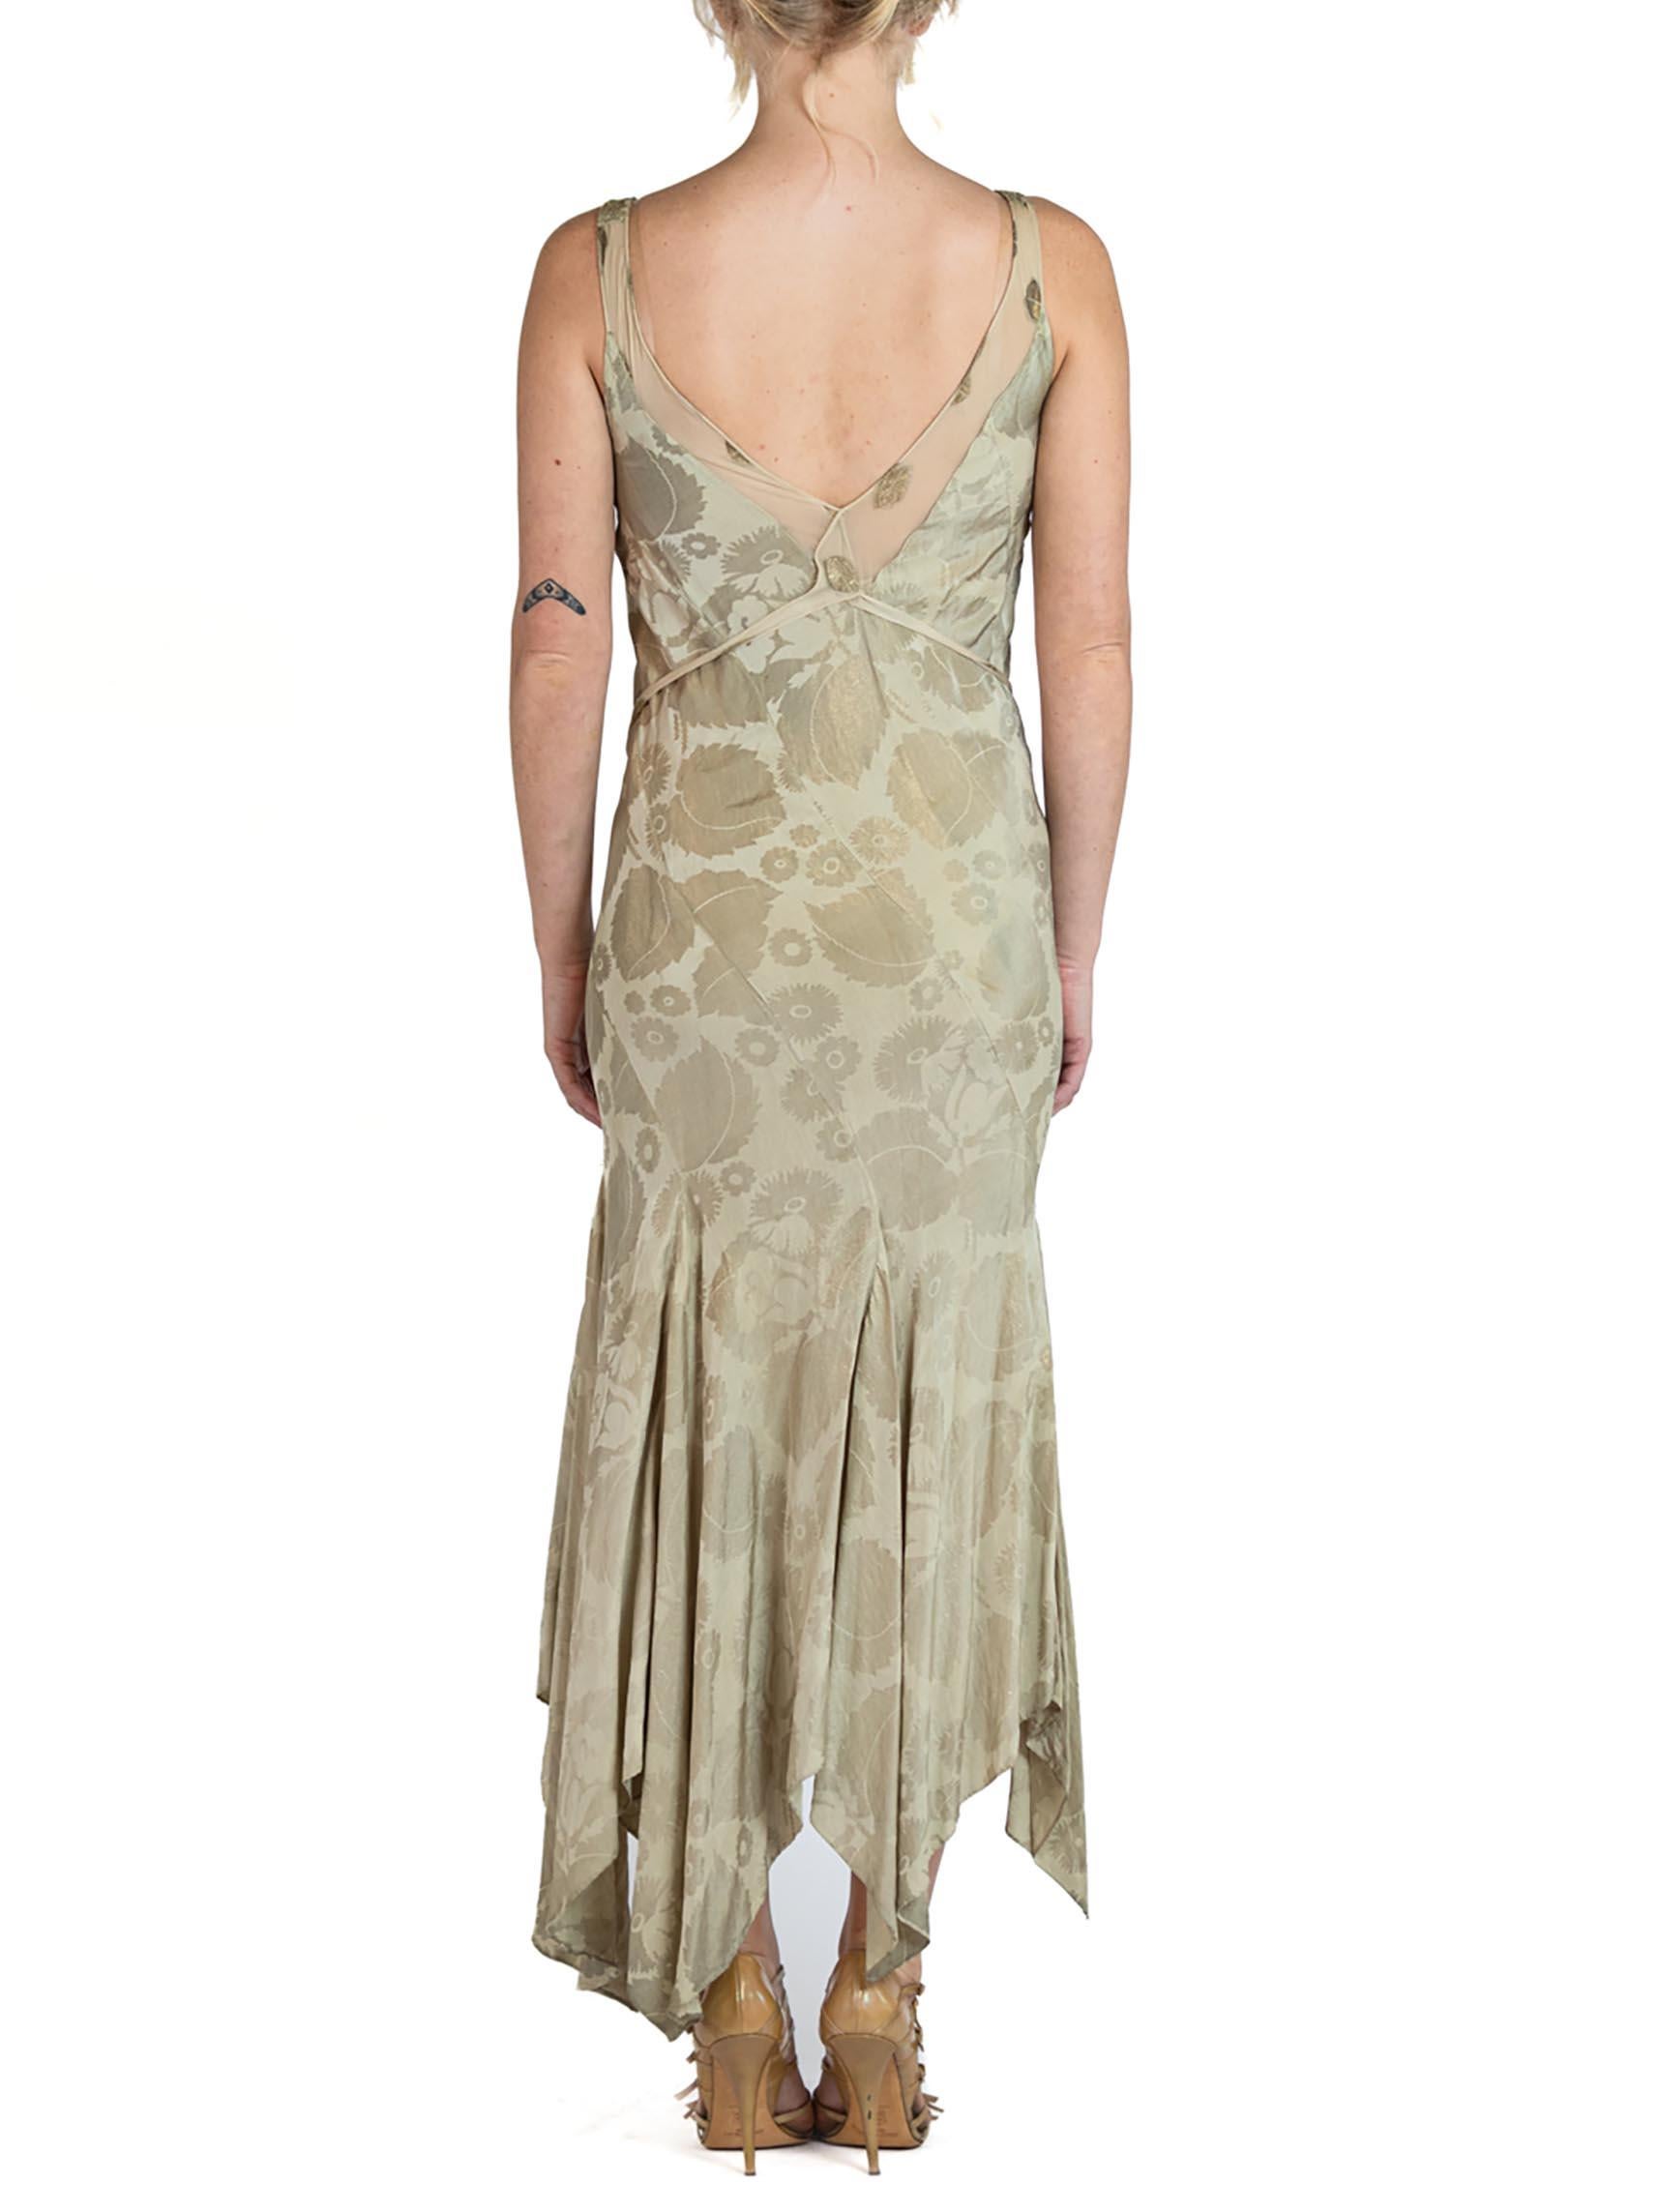 Women's 1930S Bias Cut Silk Silver Lamé Floral Jacquard Old Hollywood Gown With Chiffon For Sale